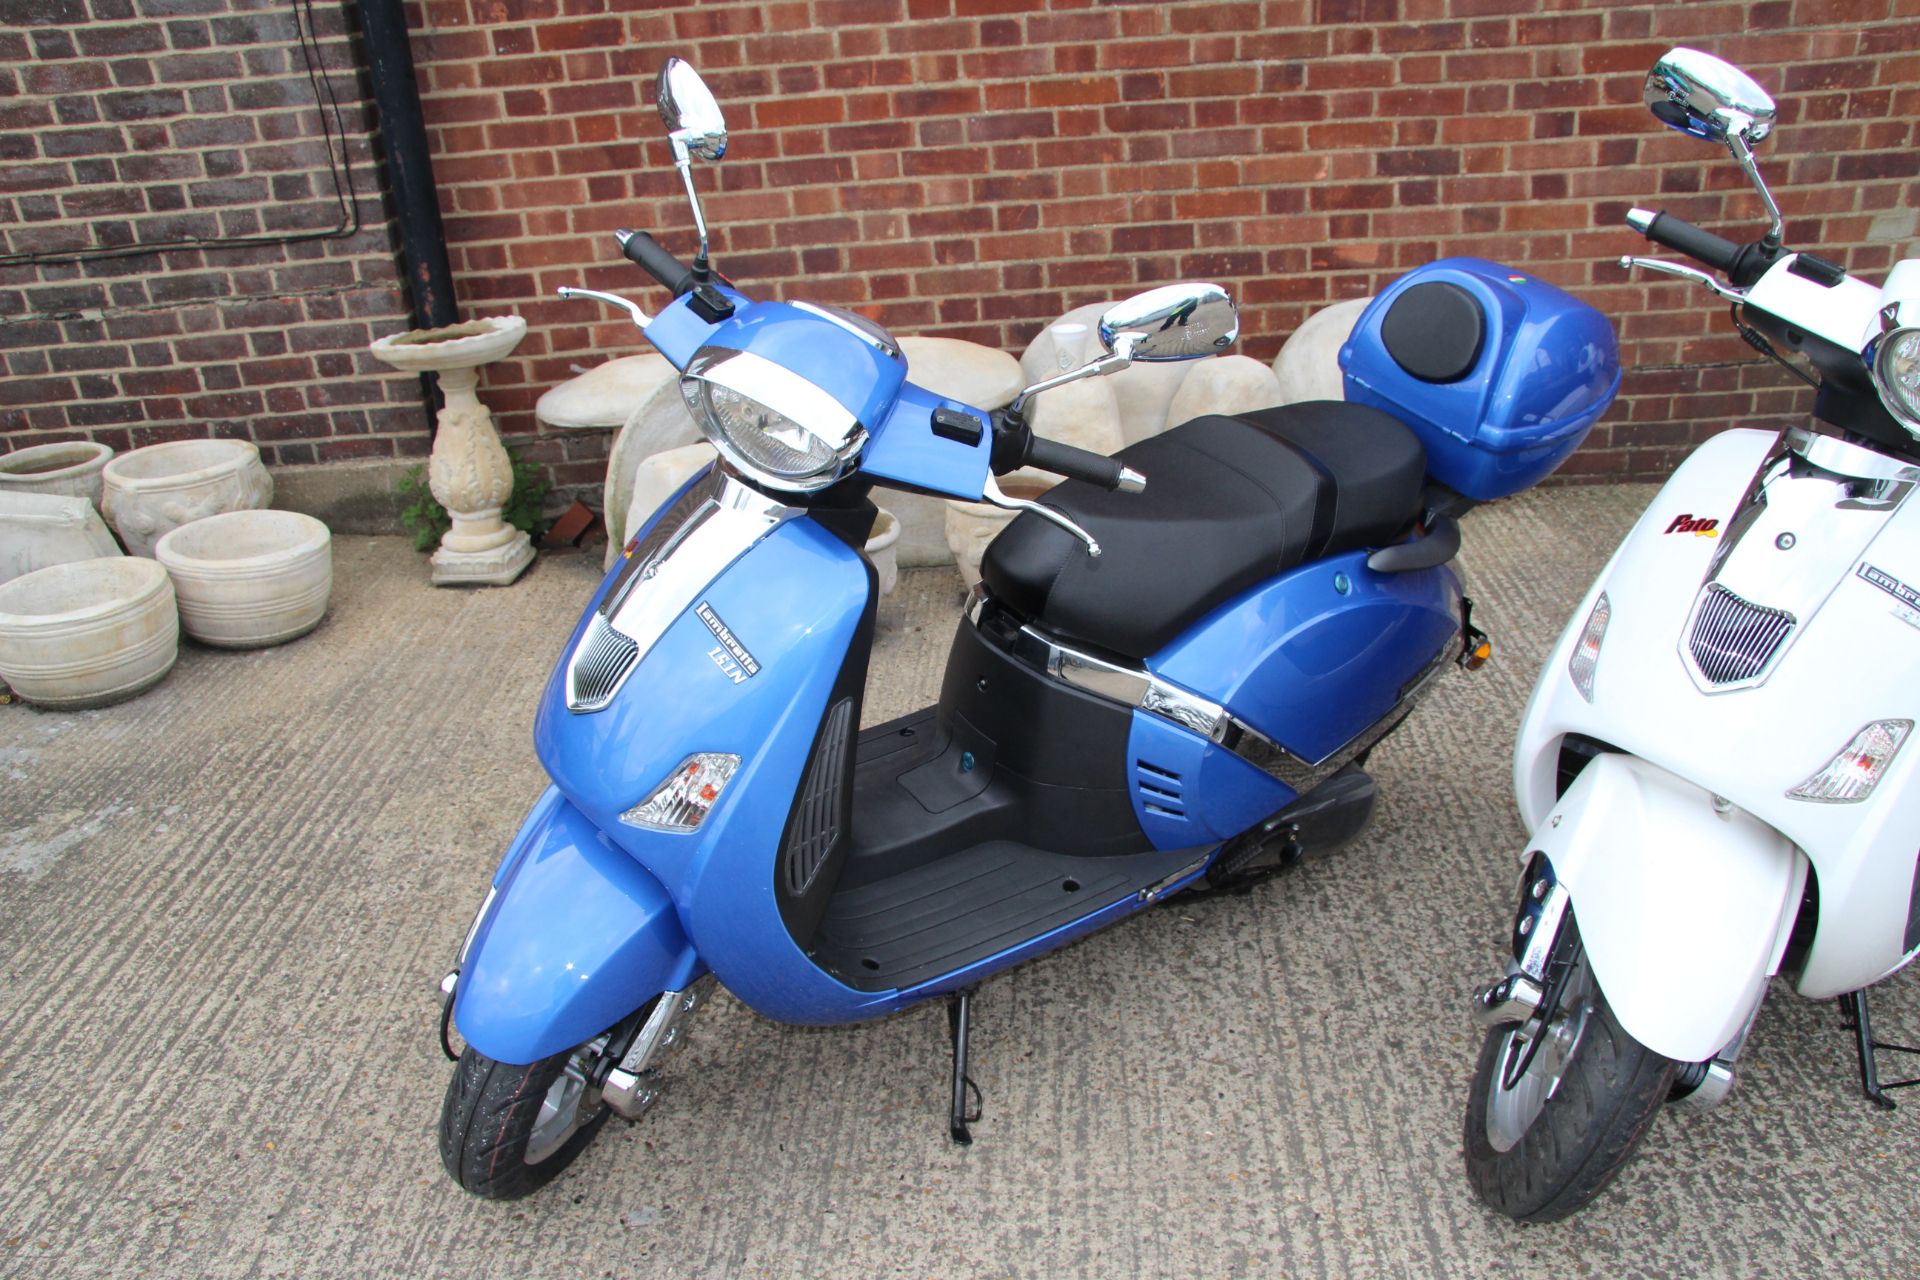 V Brand New FULLY BUILT Lambretta Pato 151cc Scooter-GREY -/Mileage 00000 NOTE:Item is Available